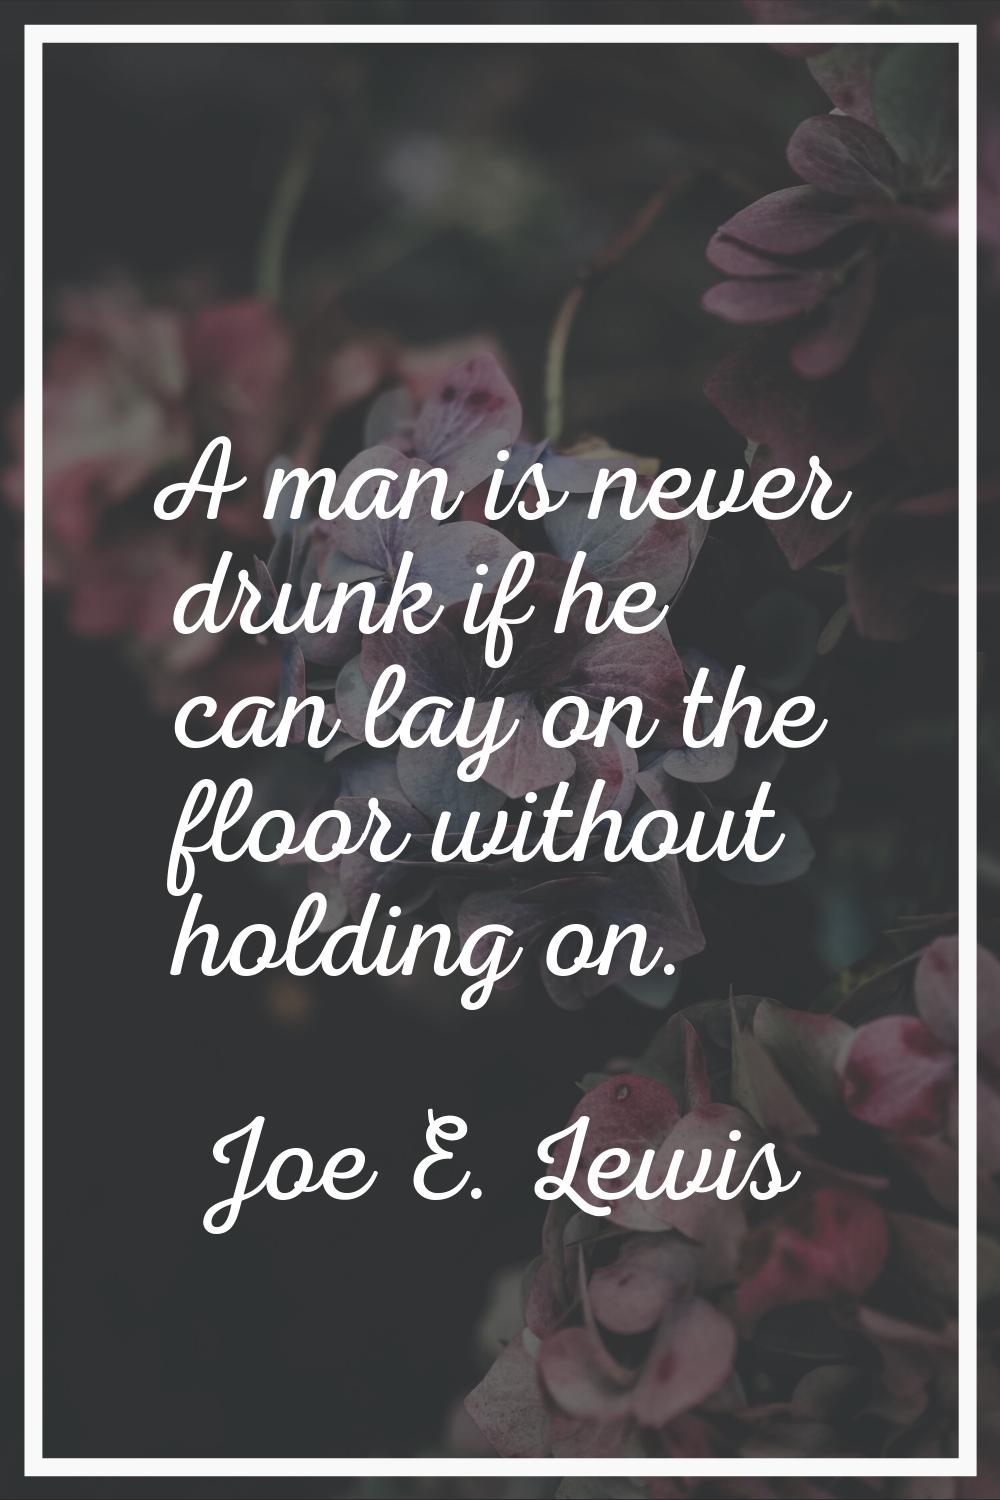 A man is never drunk if he can lay on the floor without holding on.